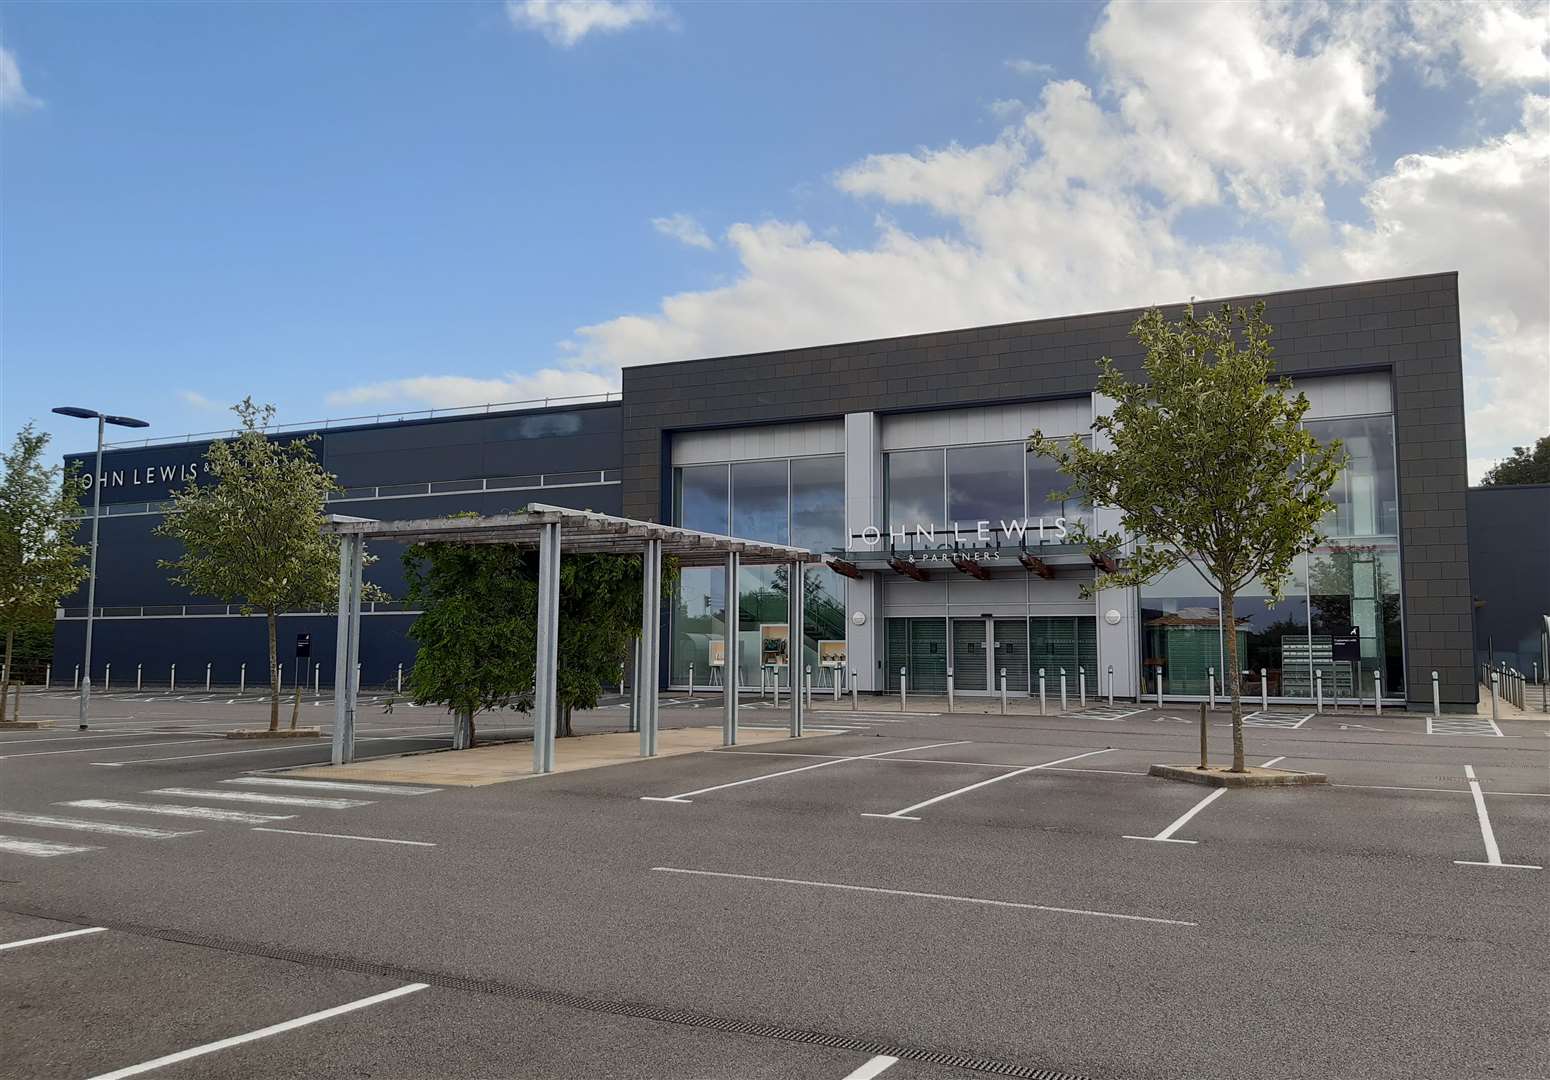 Ashford's John Lewis store was opened in 2013, making it one of the chain's more modern branches